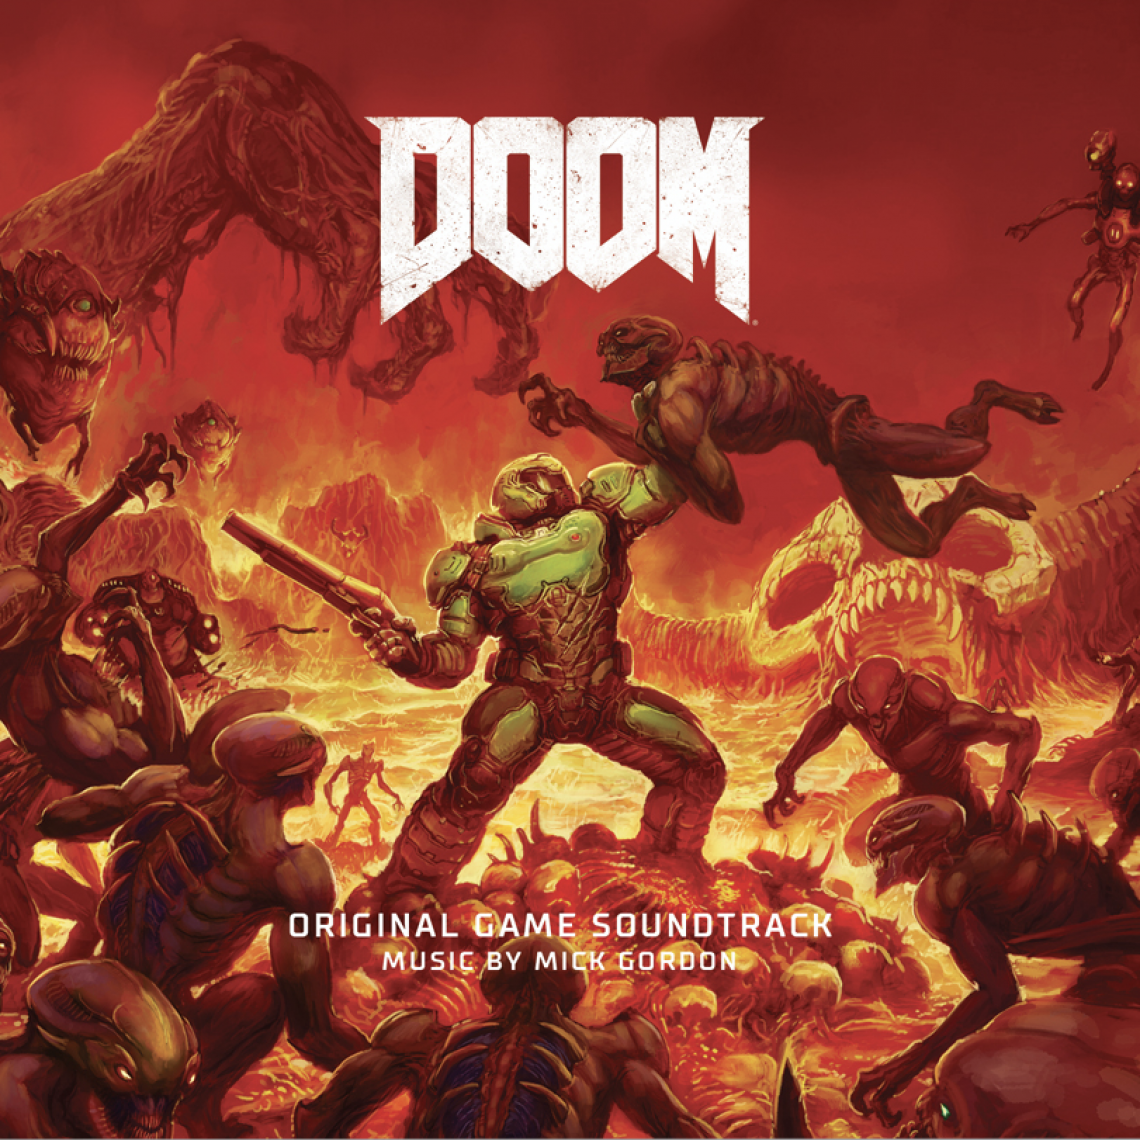 DOOM® (Original Game Soundtrack) rips and tears its way onto Vinyl and CD in Summer 2018